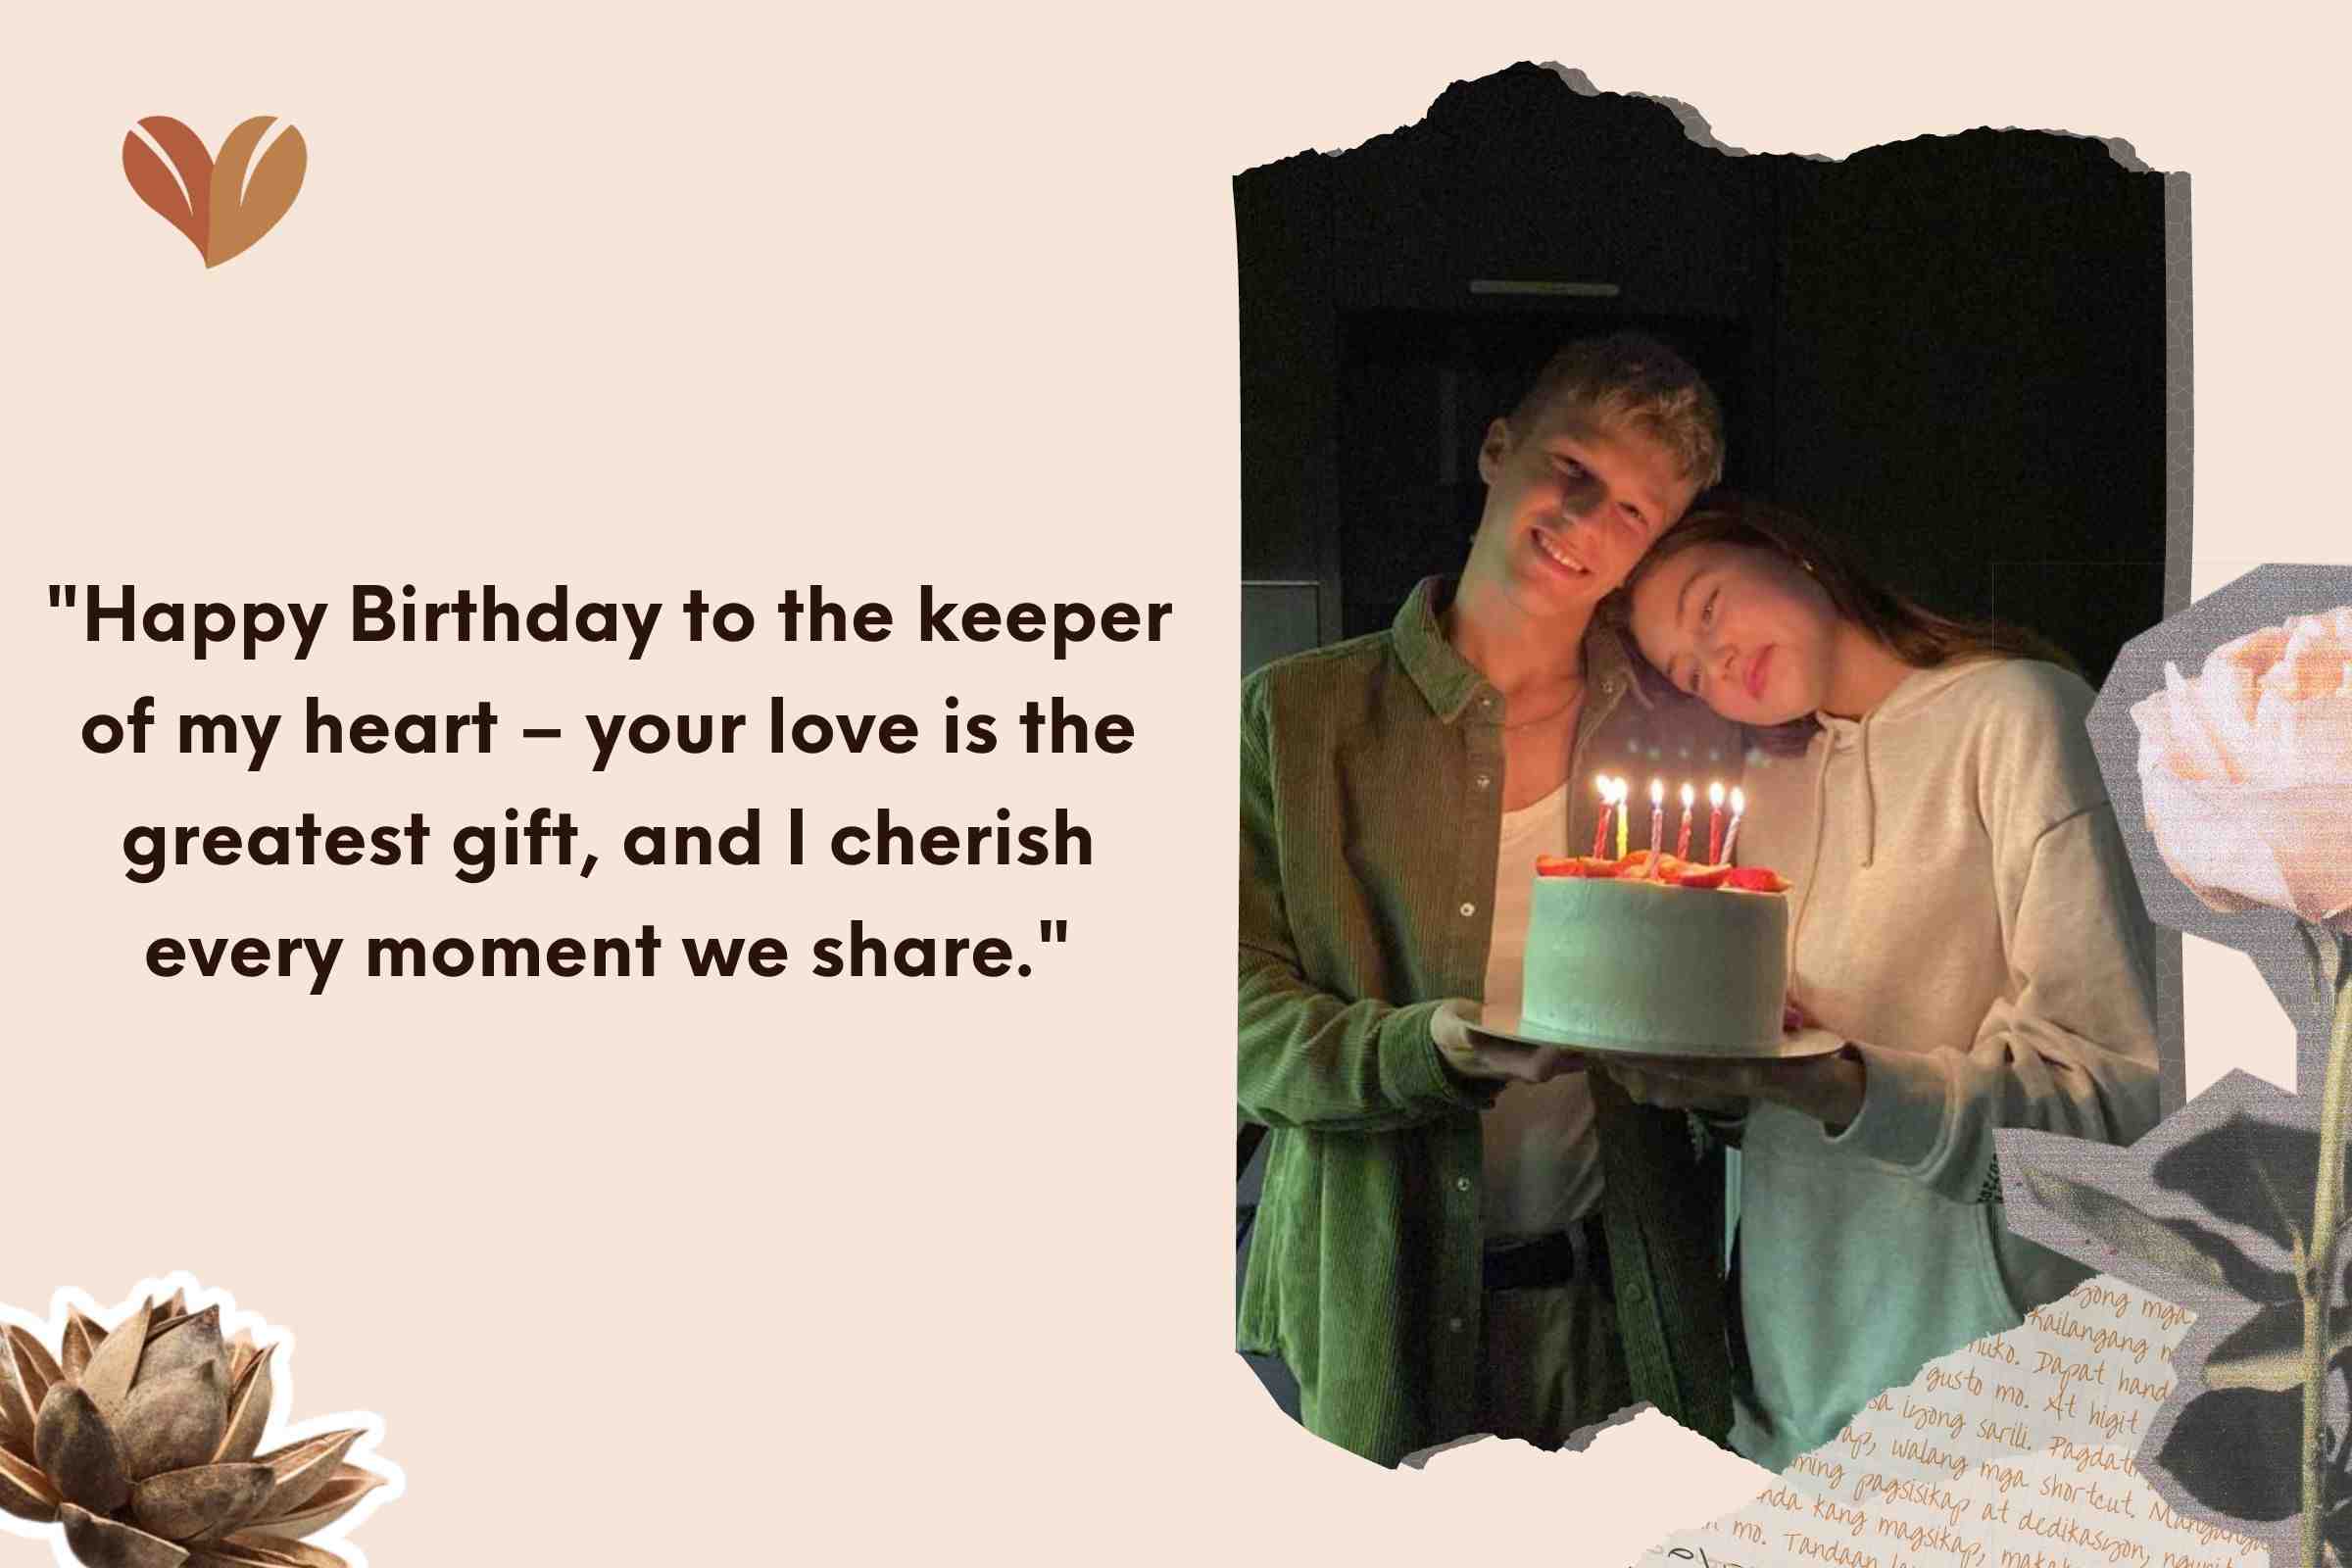 Happy Birthday to the keeper of my heart – your love is the greatest gift, and I cherish every moment we share.